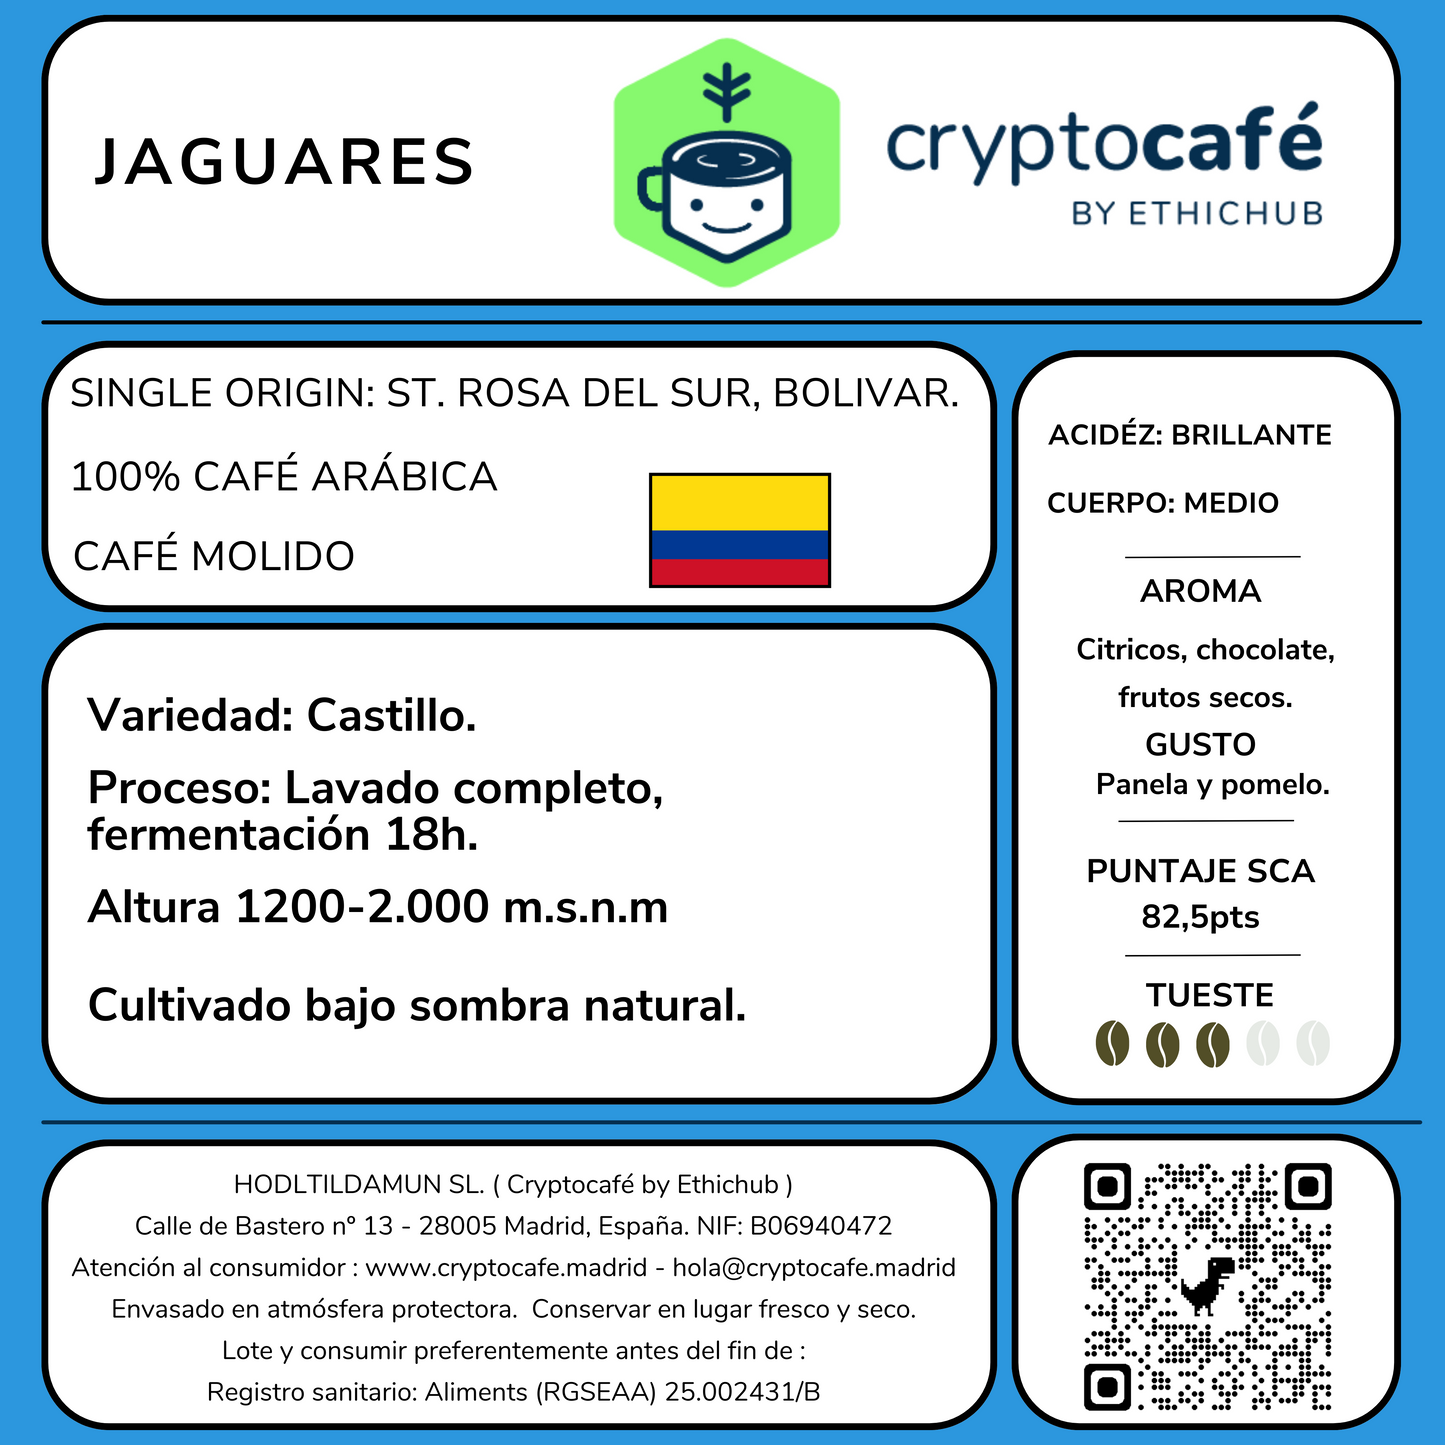 Jaguares Specialty Coffee - Colombia